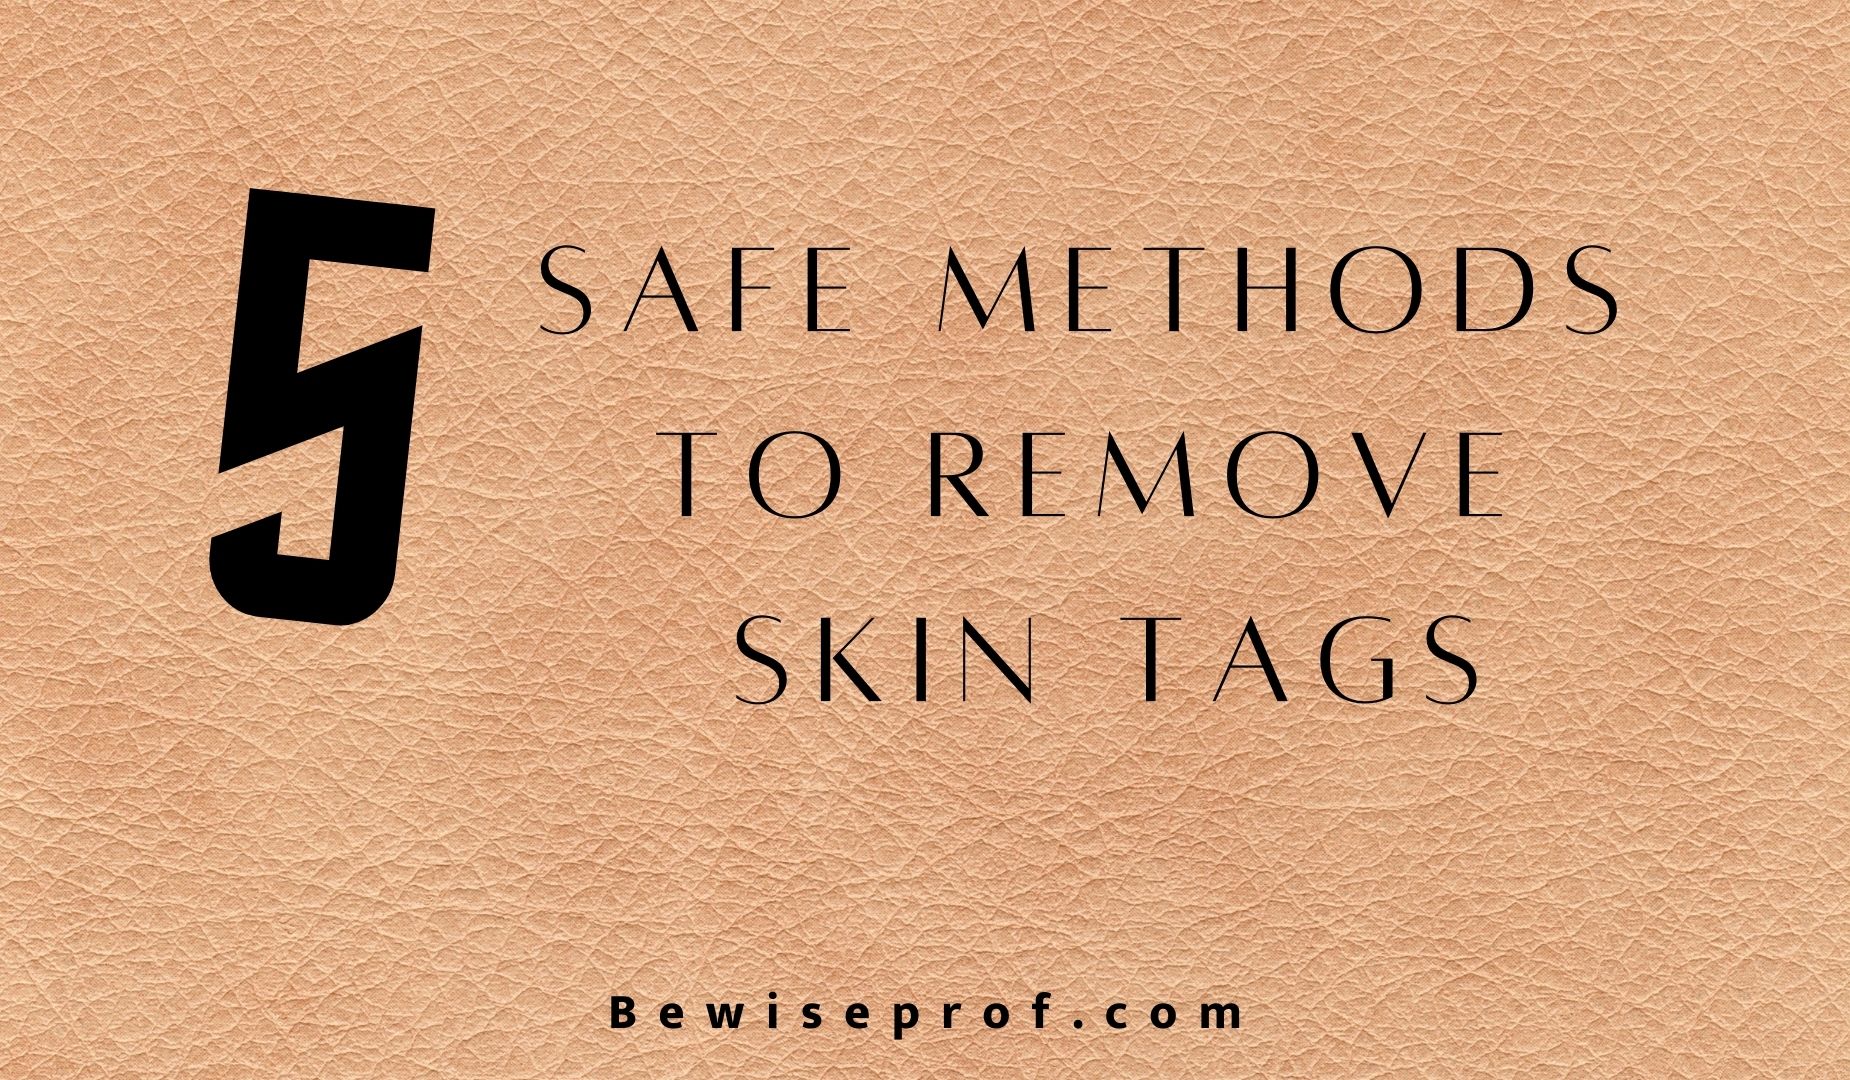 5 Safe Methods to Remove Skin Tags